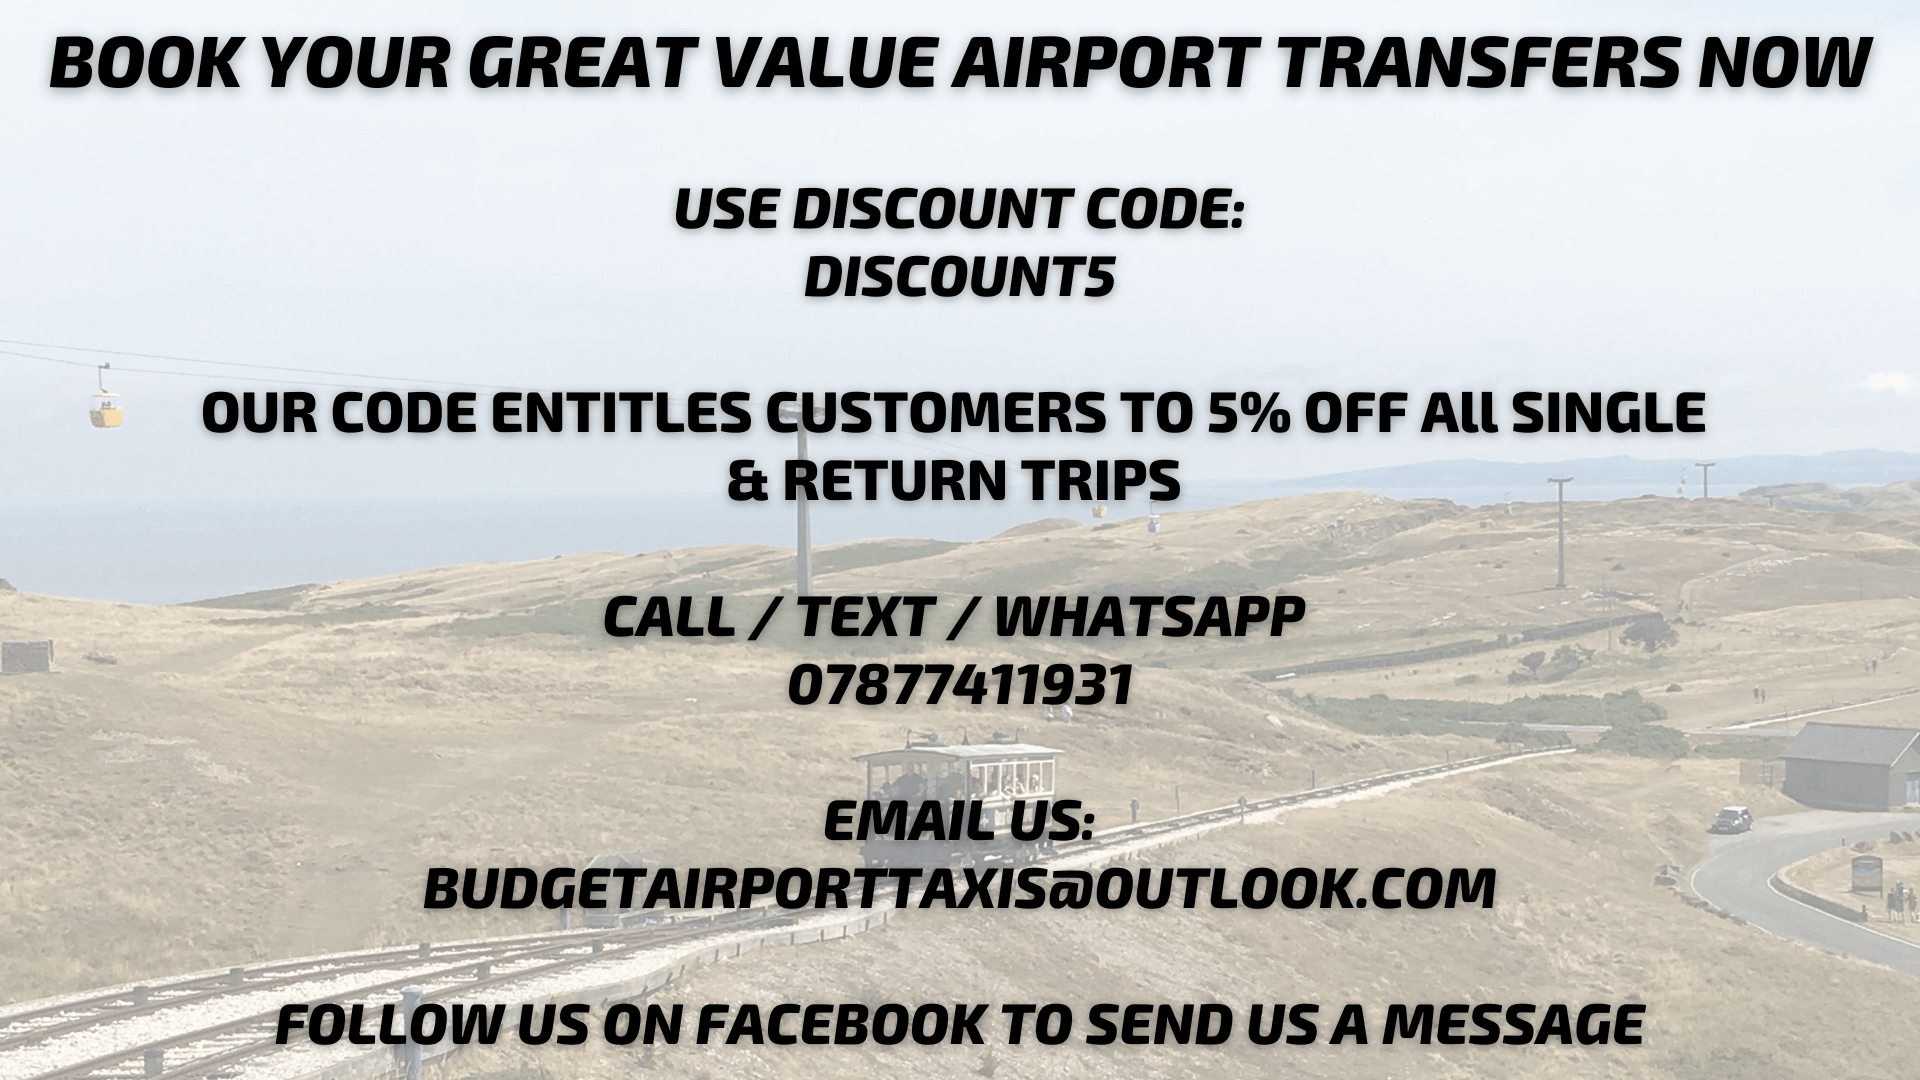 dalry glasgow airport taxi transfer 5% discount